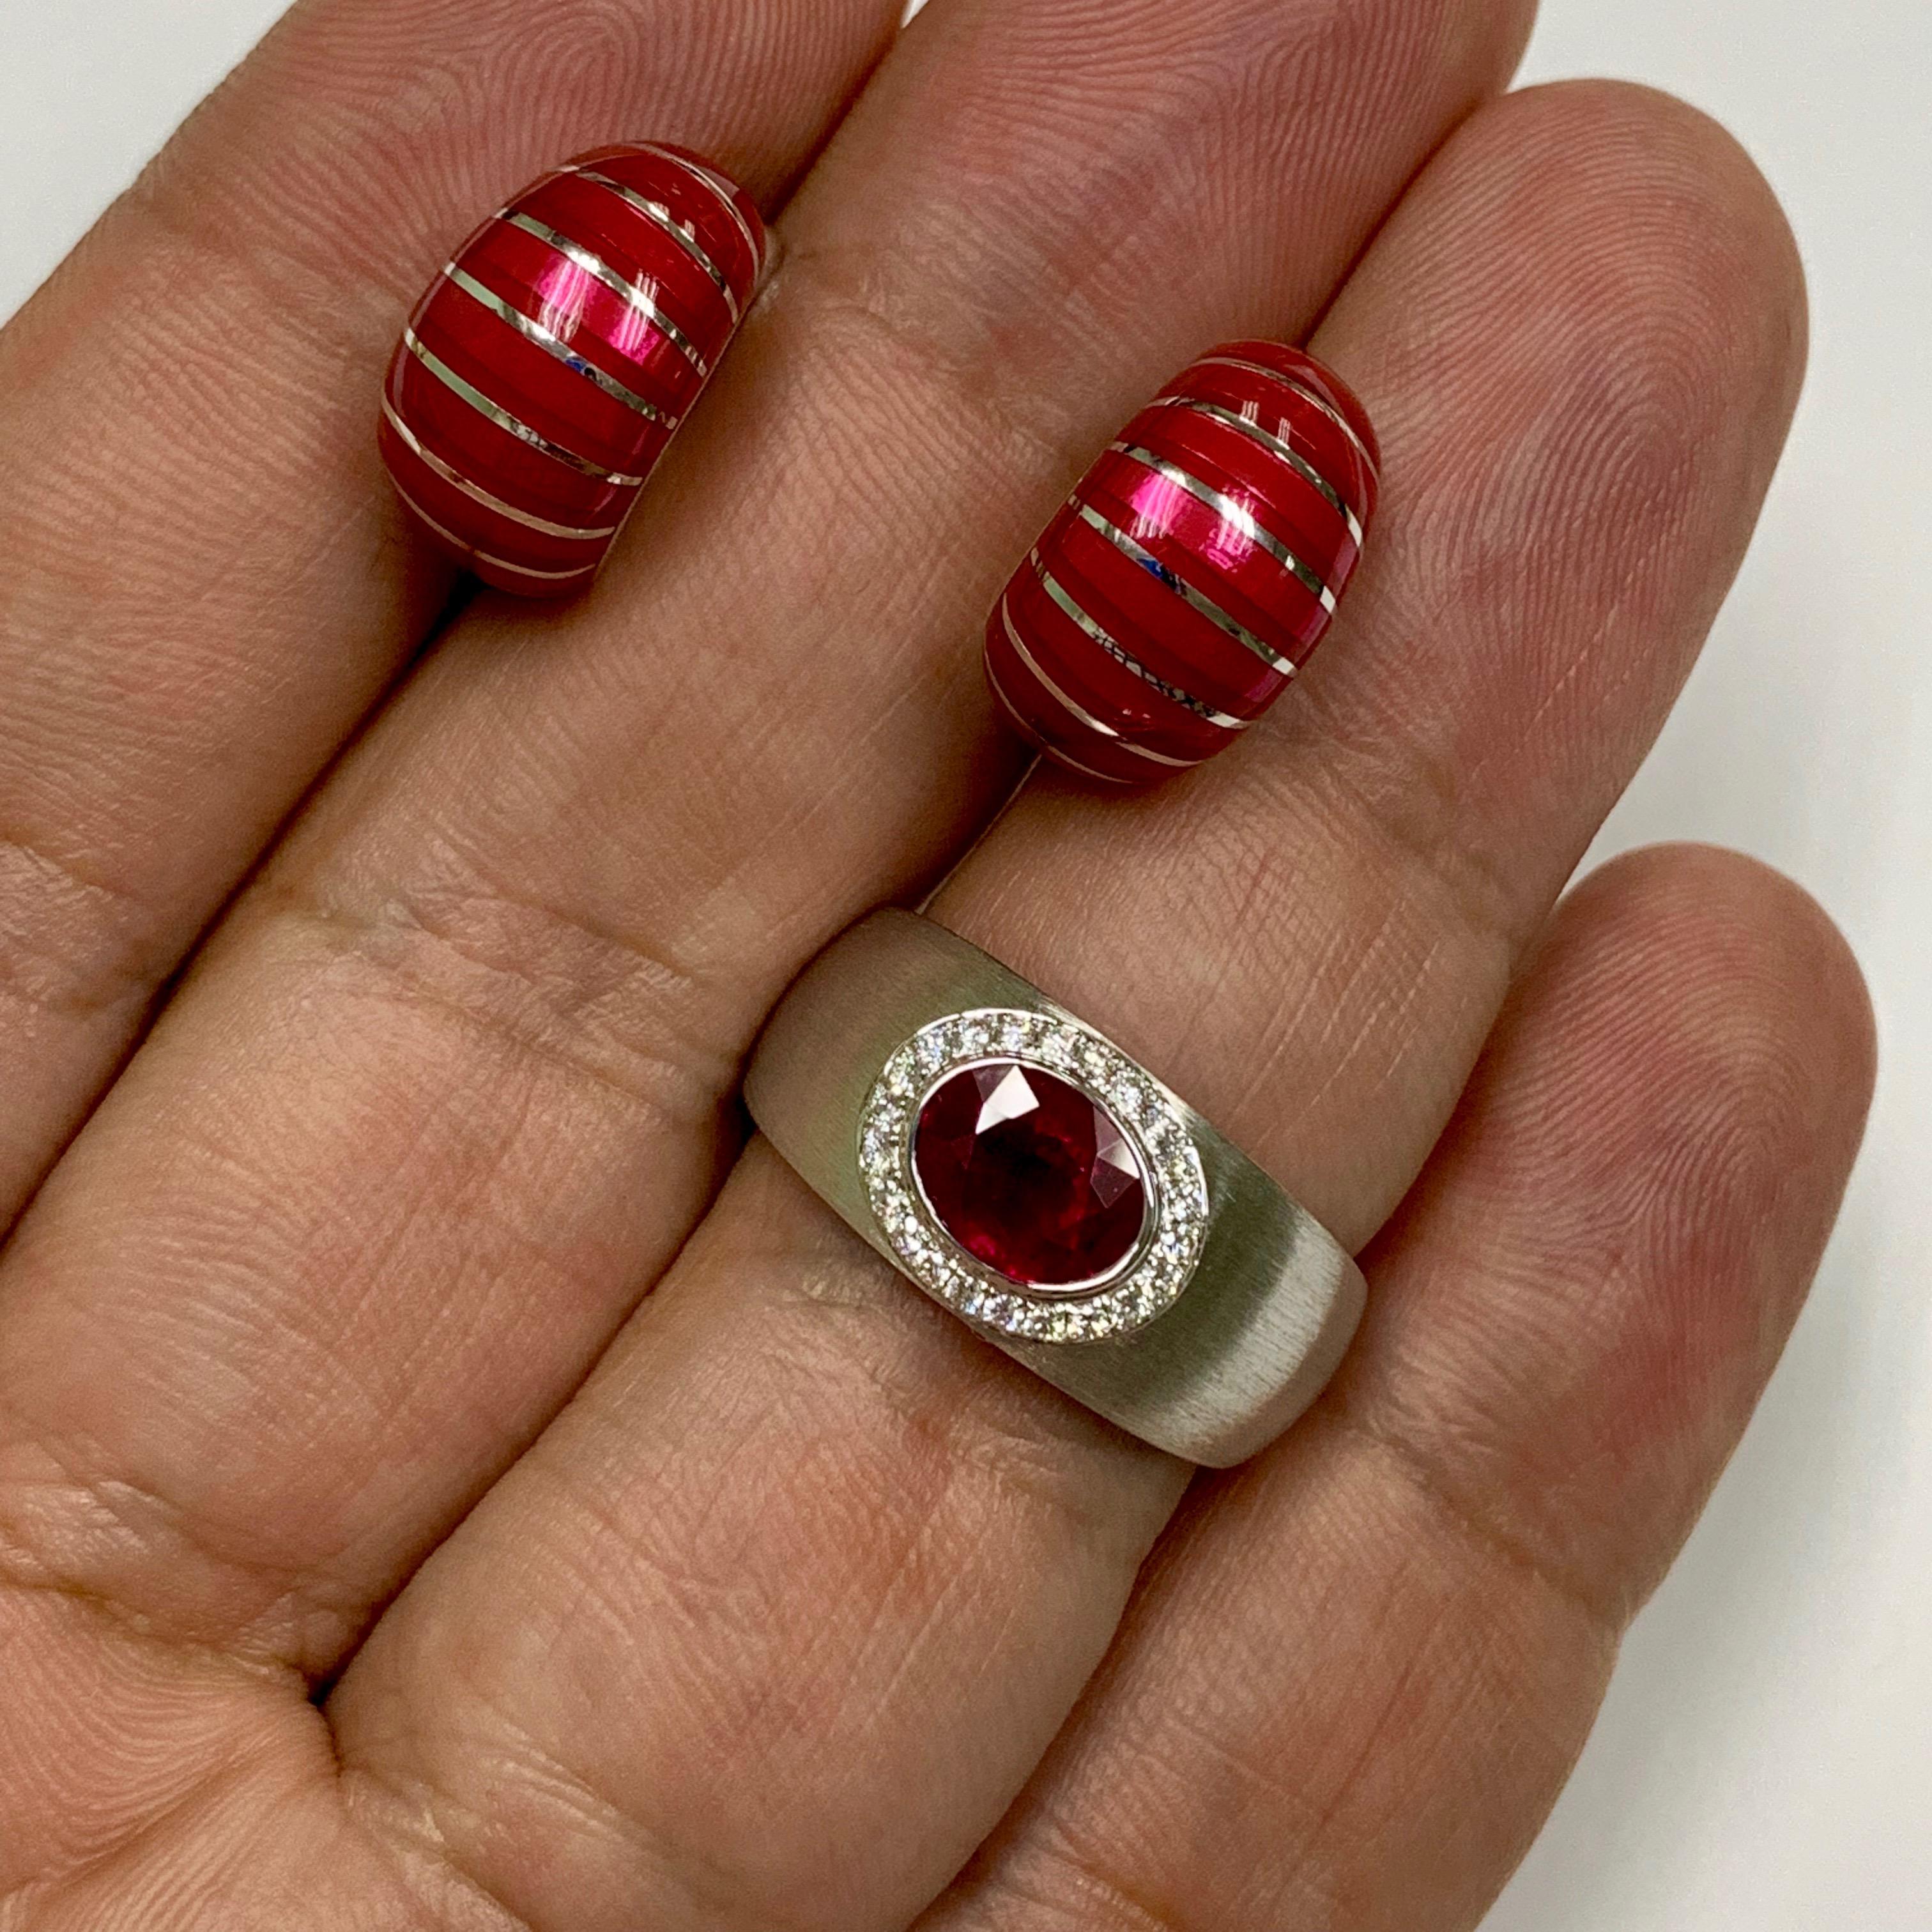 AIGL Certified 2,01 Carat Ruby Diamond Enamel 18 Karat White Gold Suite
Explore the infinite combinations of Kaleidoscope Collection. It's all about mixing and matching! Take a closer look at this spectacular Suite. Made from 18K White Gold, it